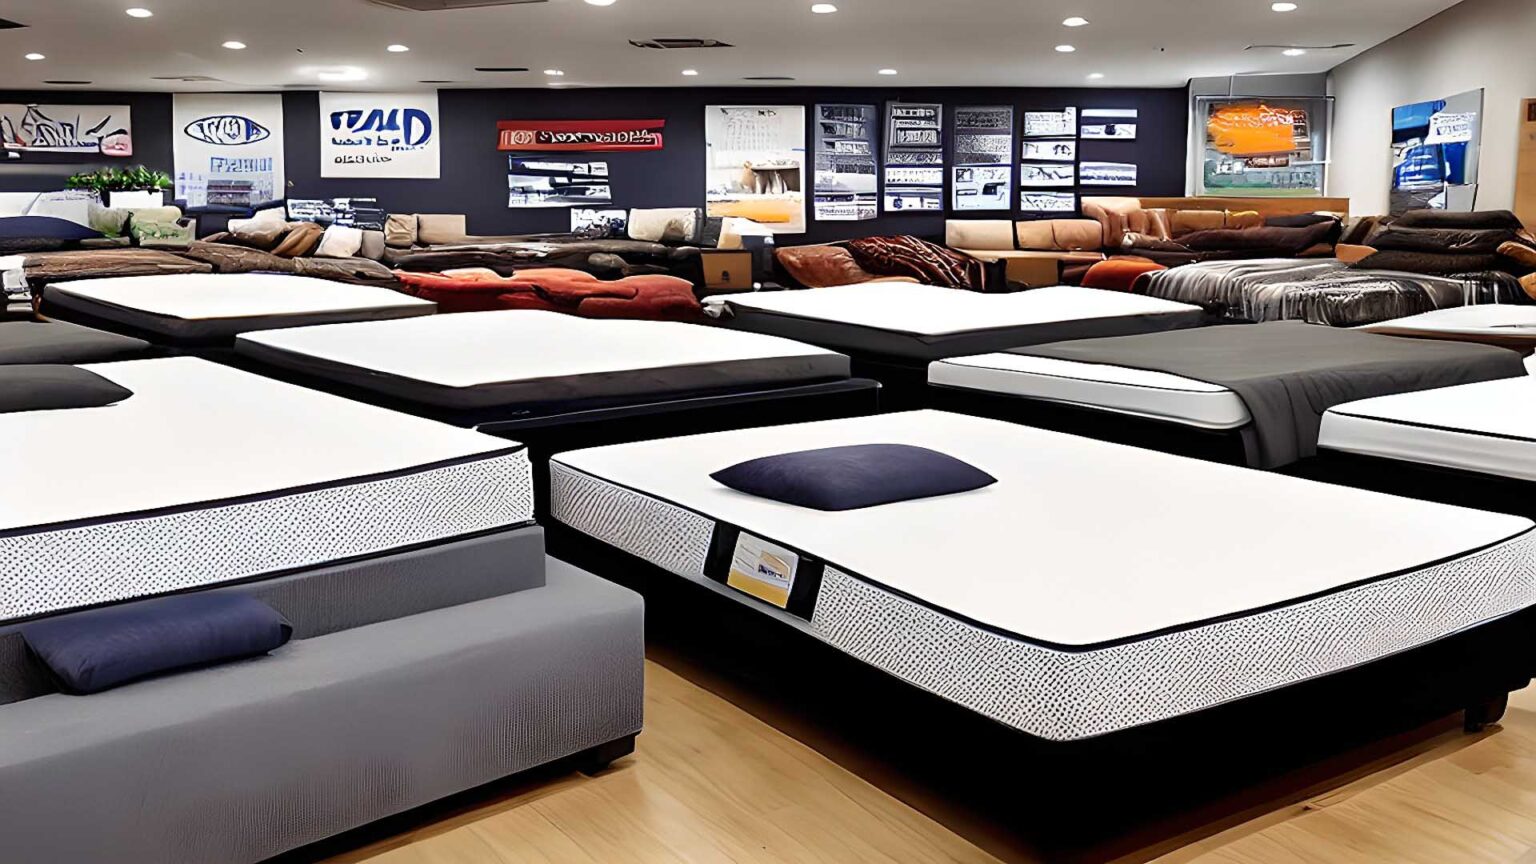 Mattress Stores, mattress dealers, and mattress retailers near me in Colorado Springs, CO